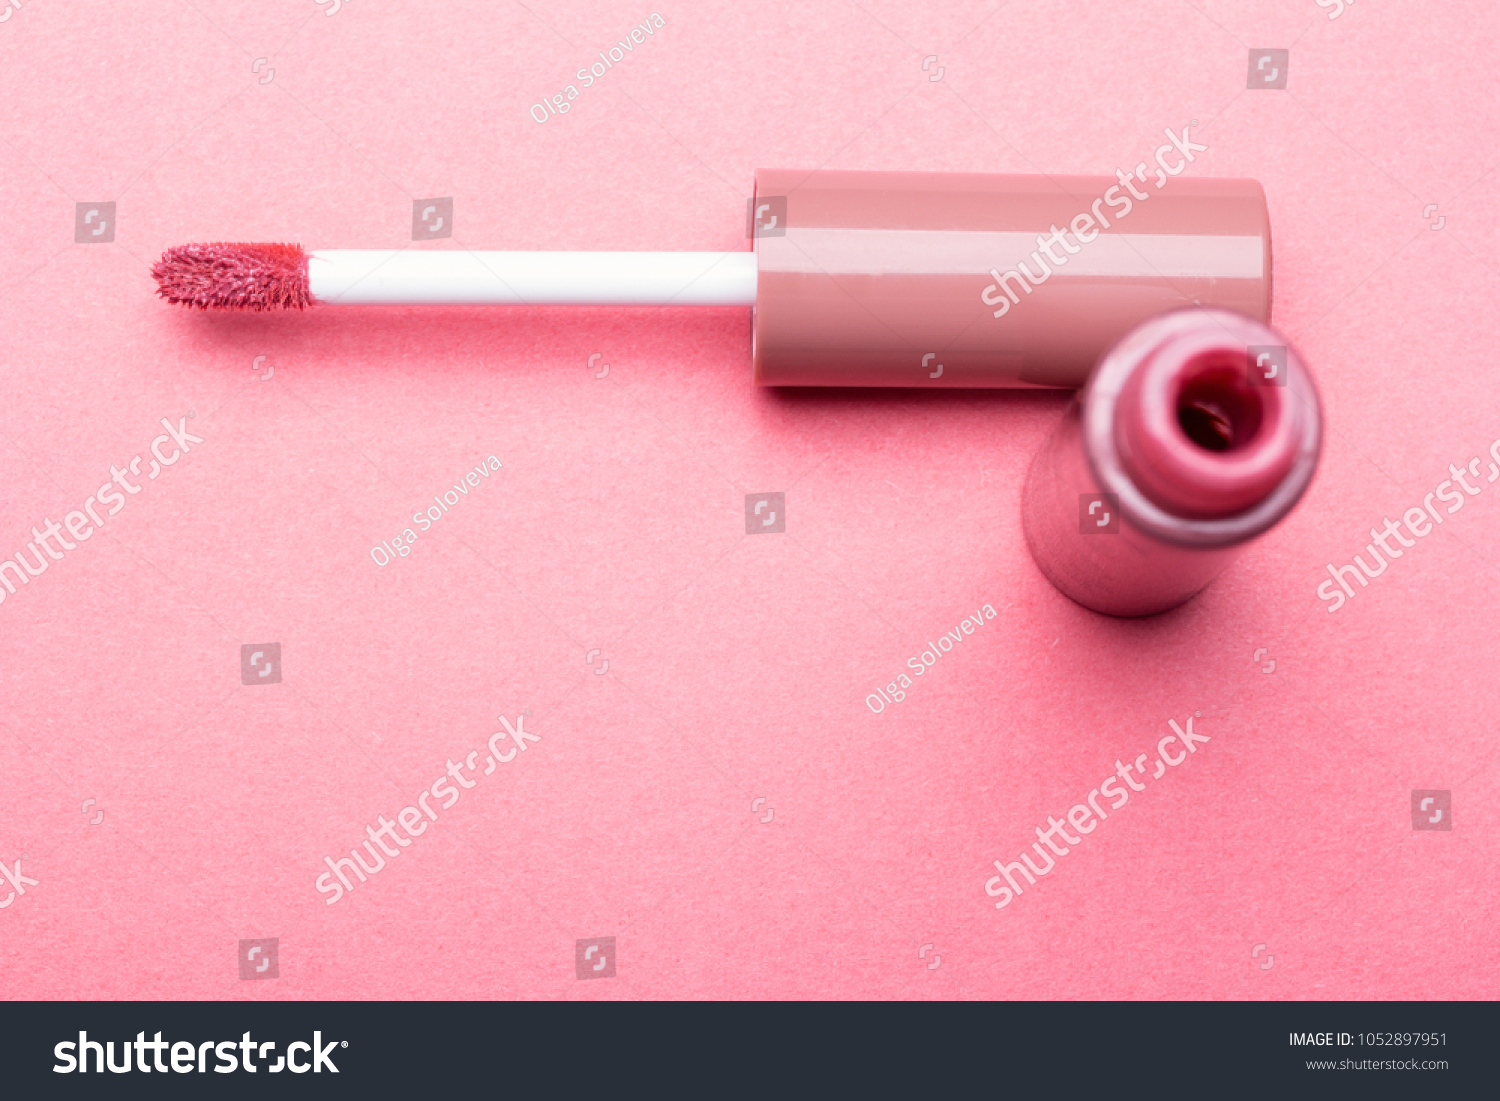 Brush for make-up lips and the bottle of liquid lipstick close-up on a pink background with copyspace #1052897951